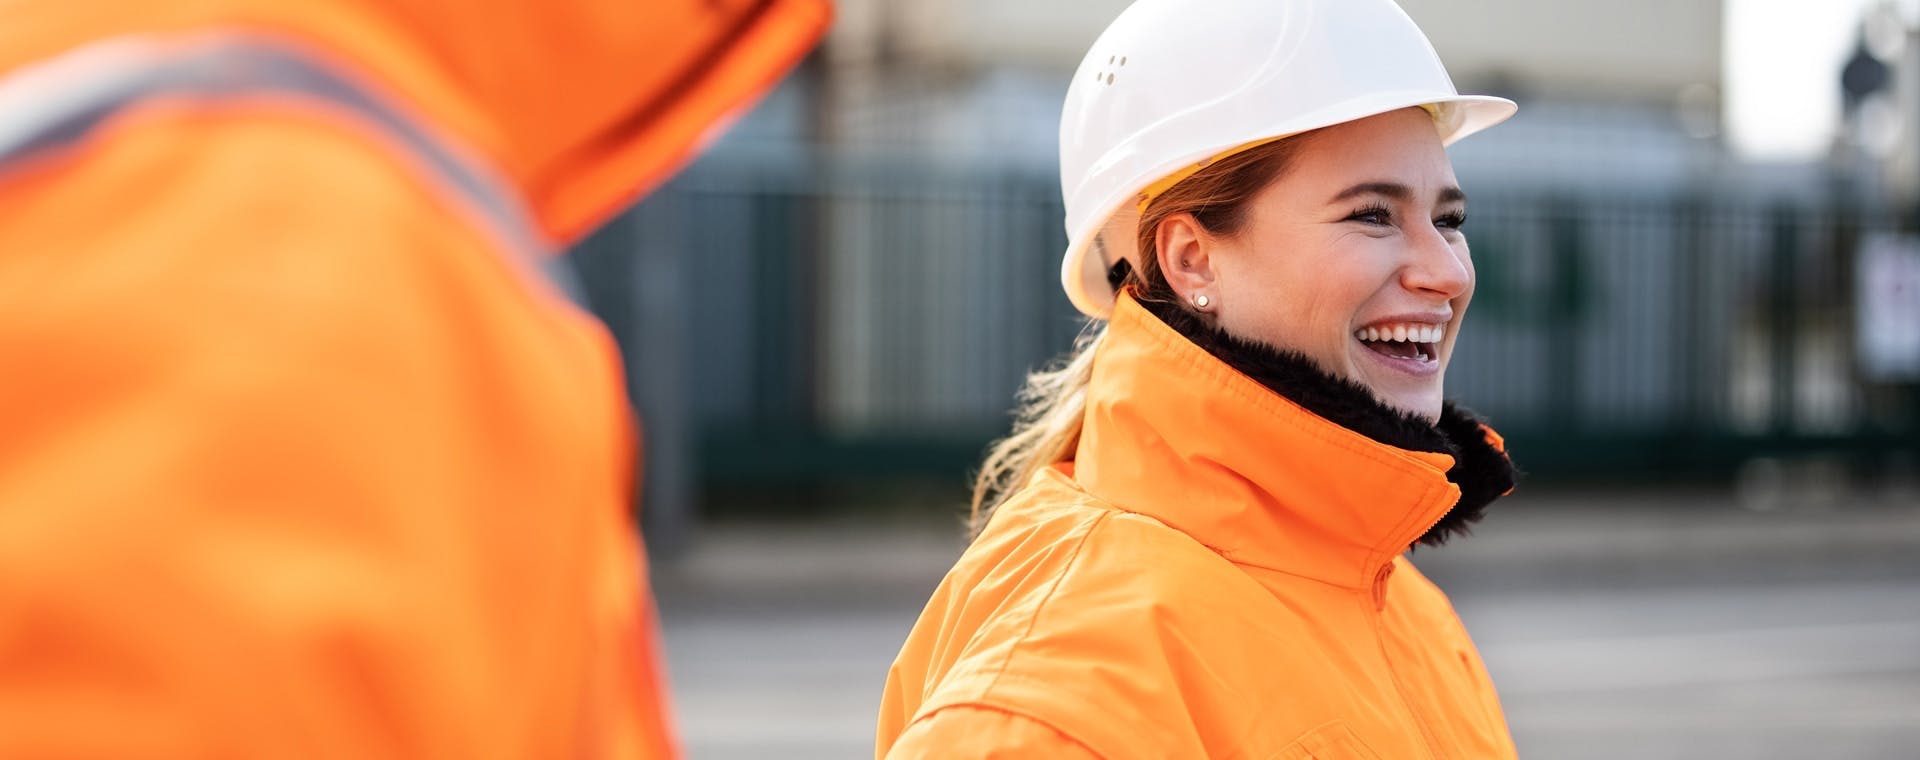 A woman wearing orange workwear and a safety helmet, smiling confidently.